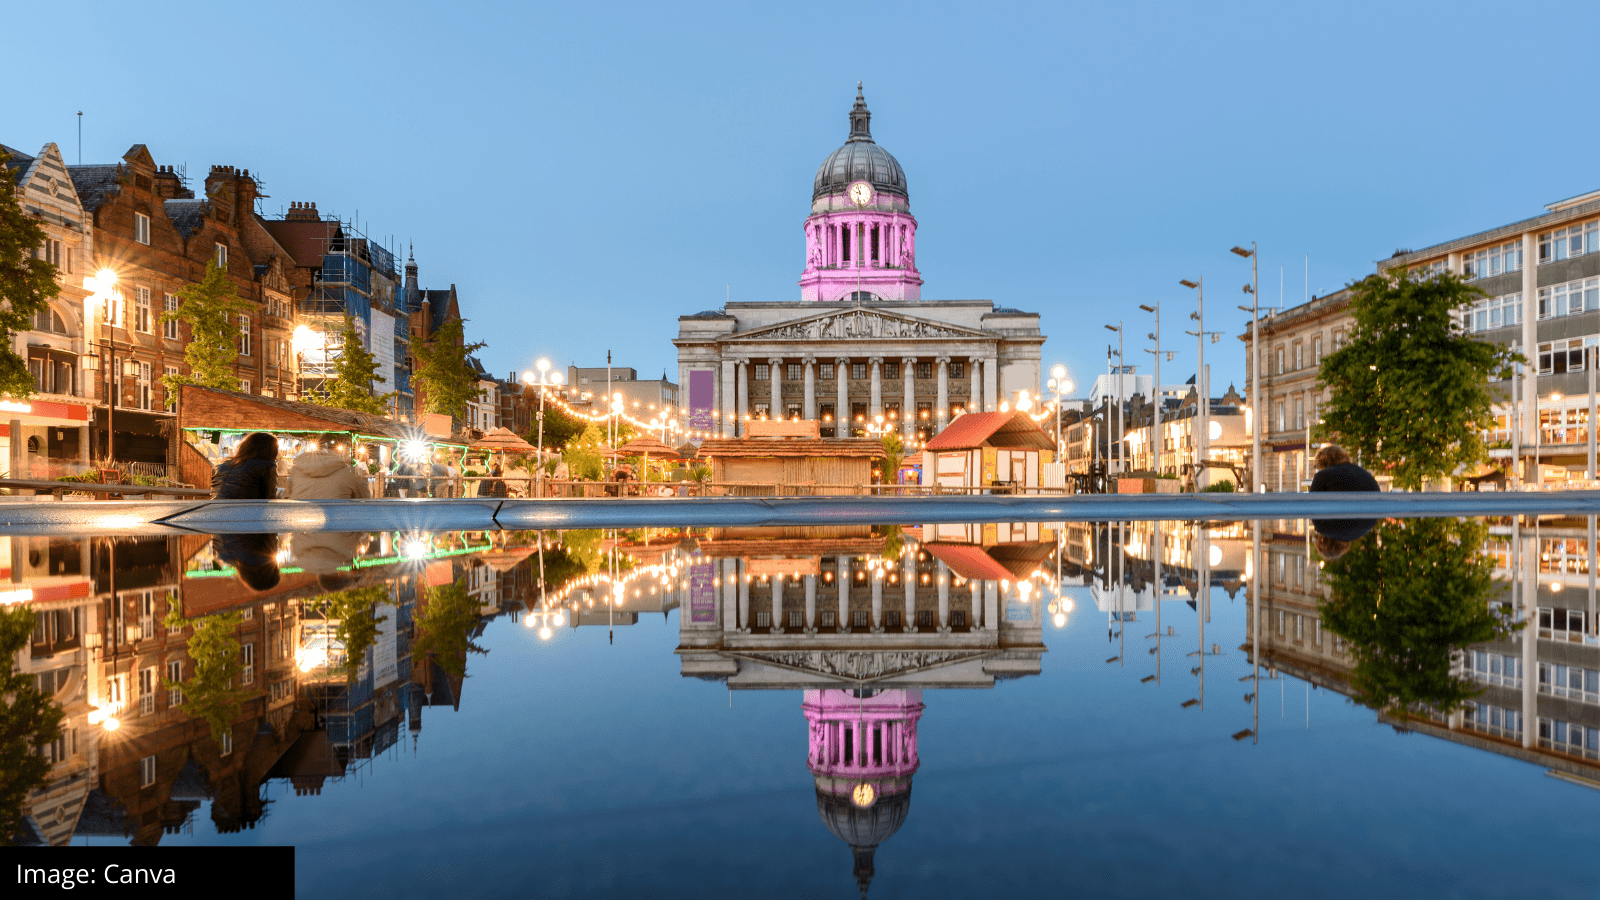 What’s in store for Nottingham in 2021